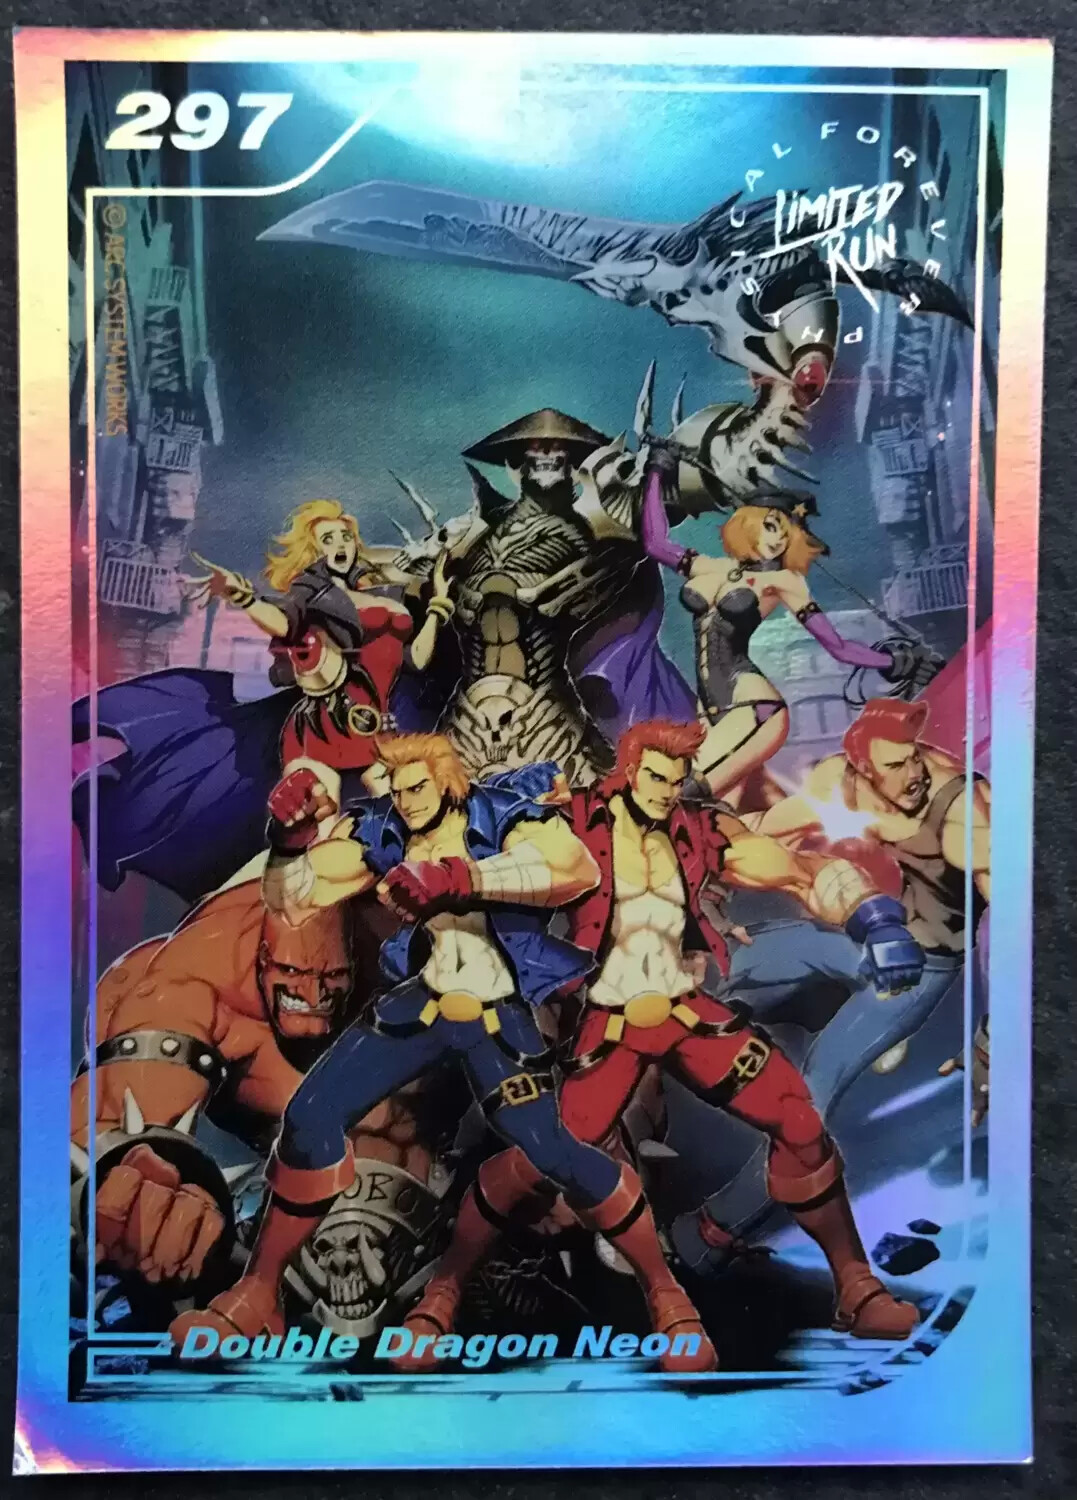 Double Dragon Neon - Limited Run Cards Series 2 297